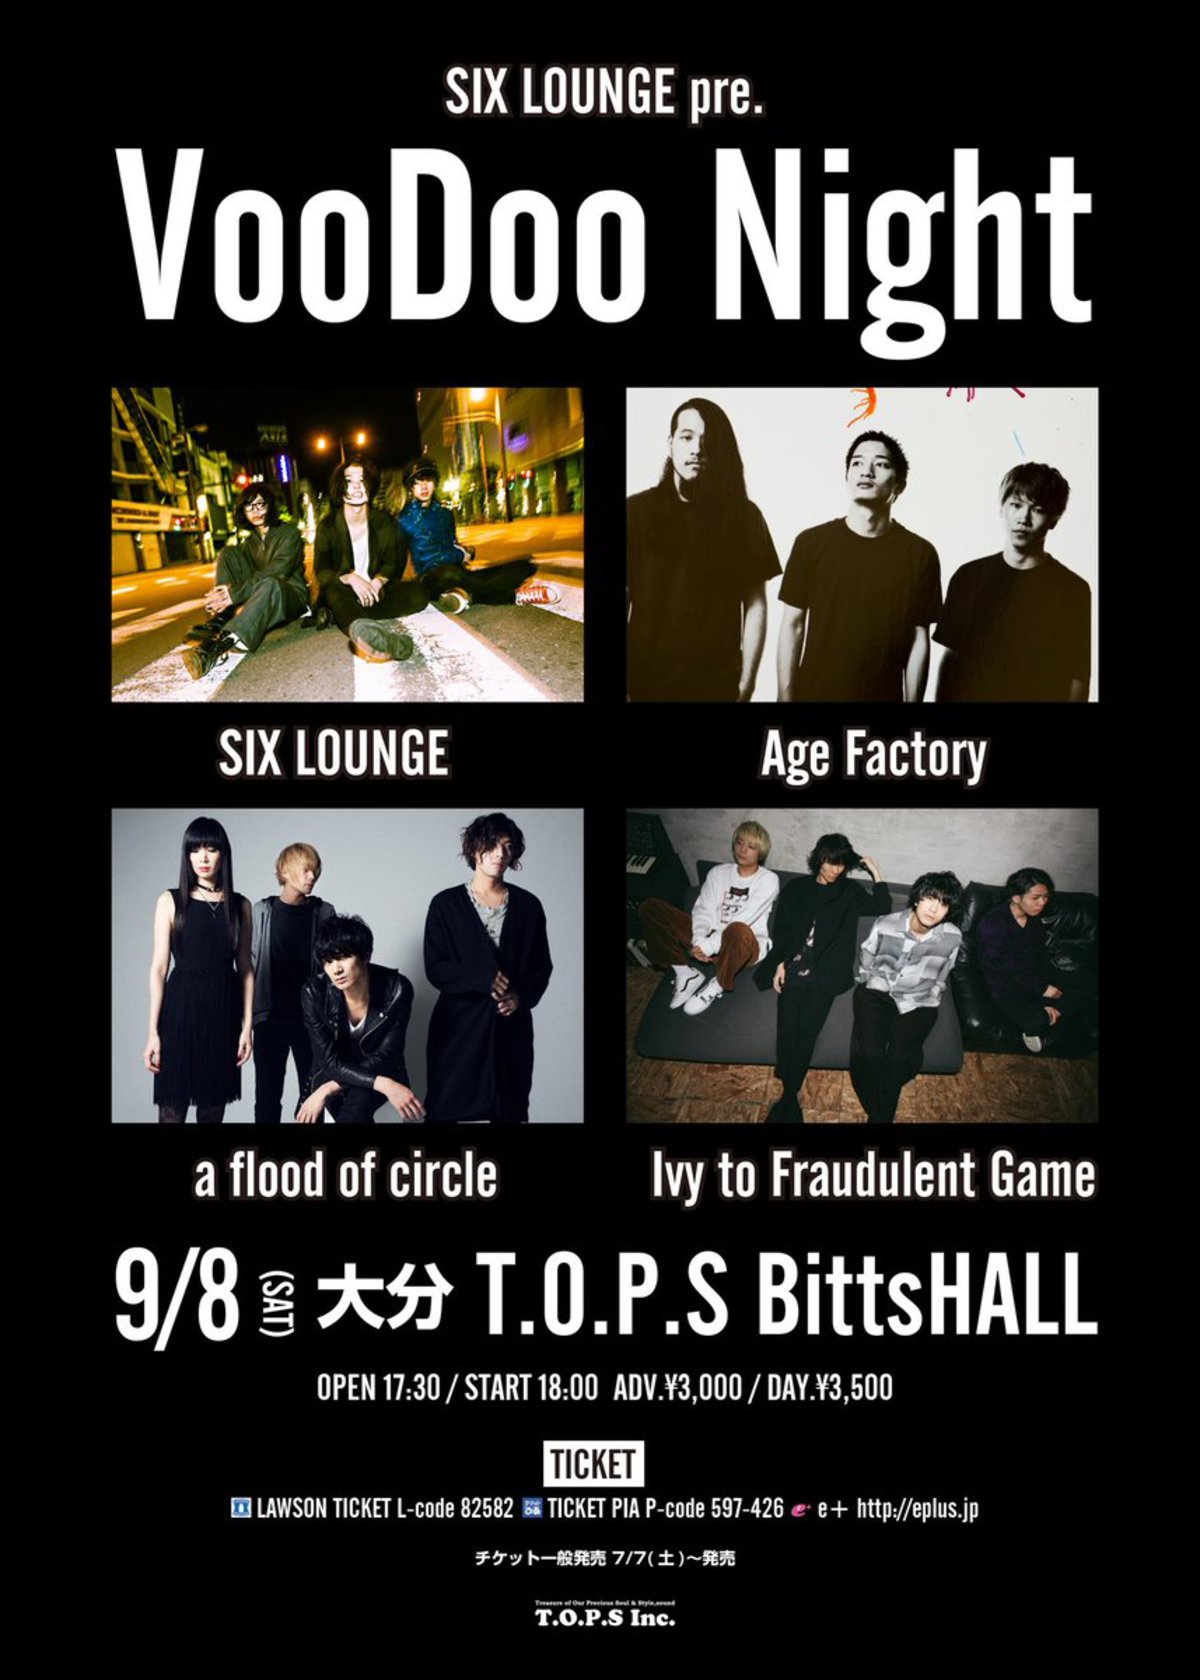 Six Lounge 9 8に主催イベント Voodoo Night 開催 A Flood Of Circle Ivy To Fraudulent Game Age Factory出演